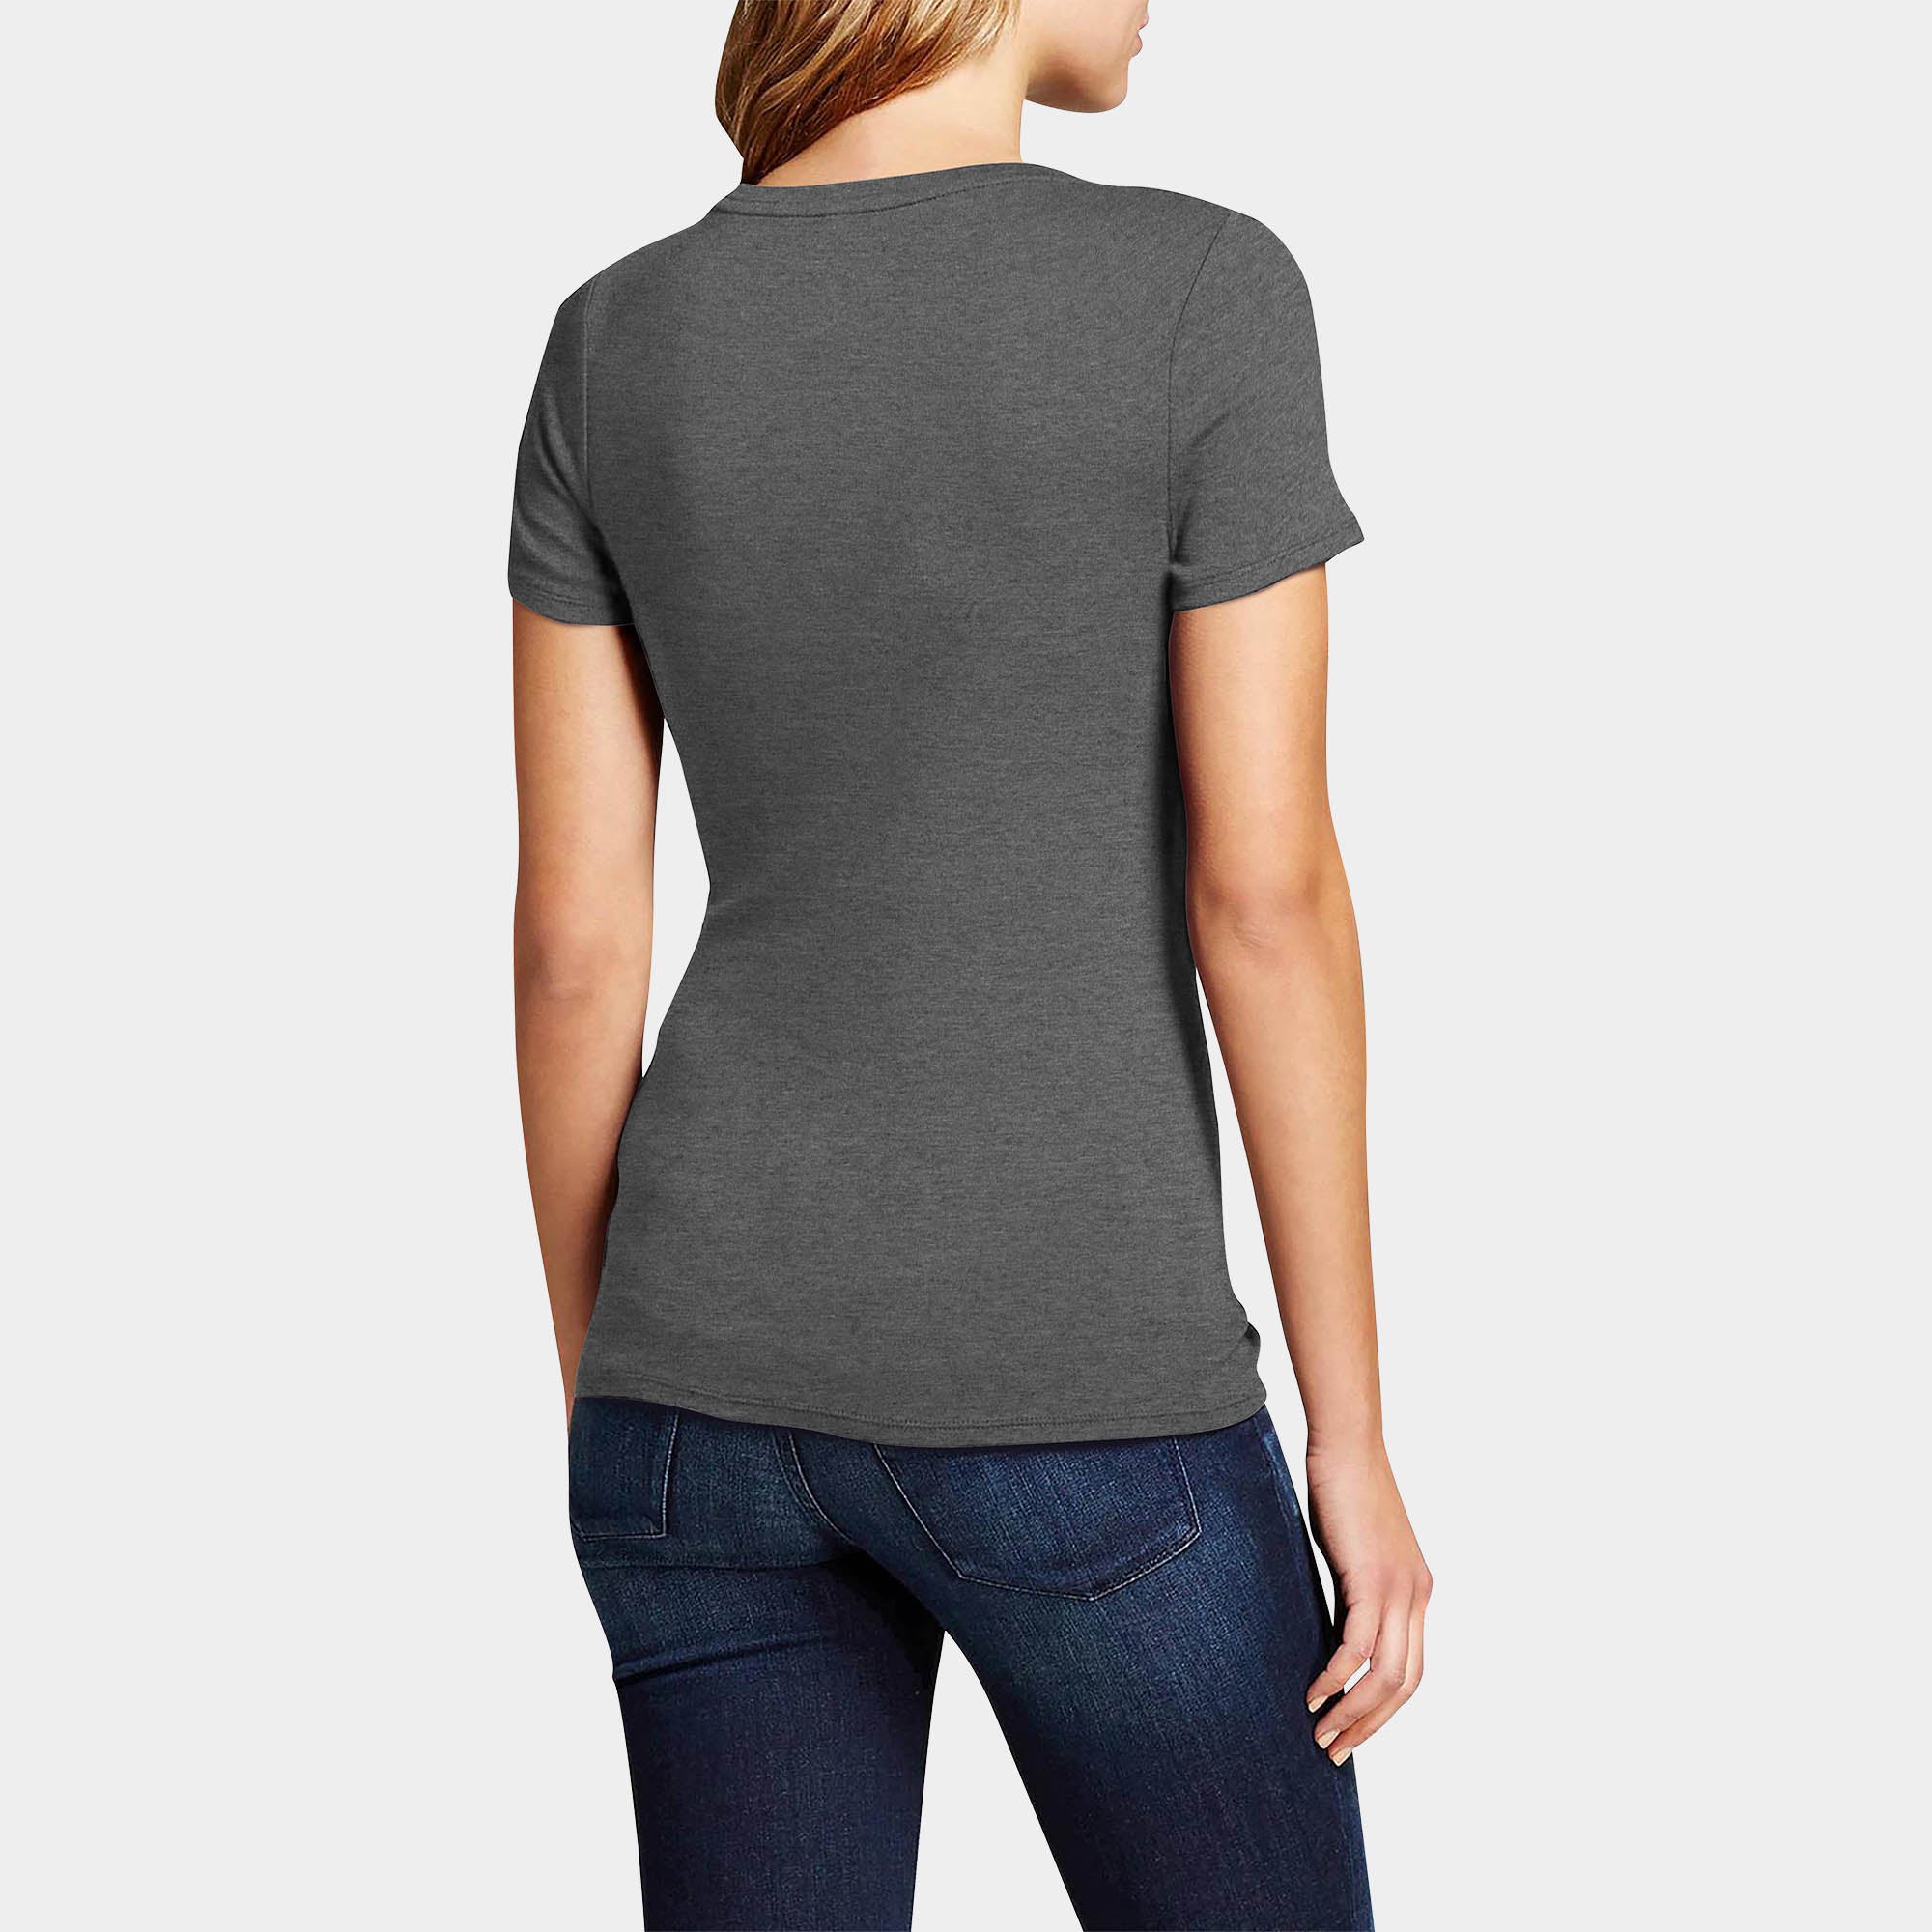 comfort tee_comfort color tees_comfort colors tee shirts_womens tee_tee shirts for women_best quality t shirts for women_Charcoal